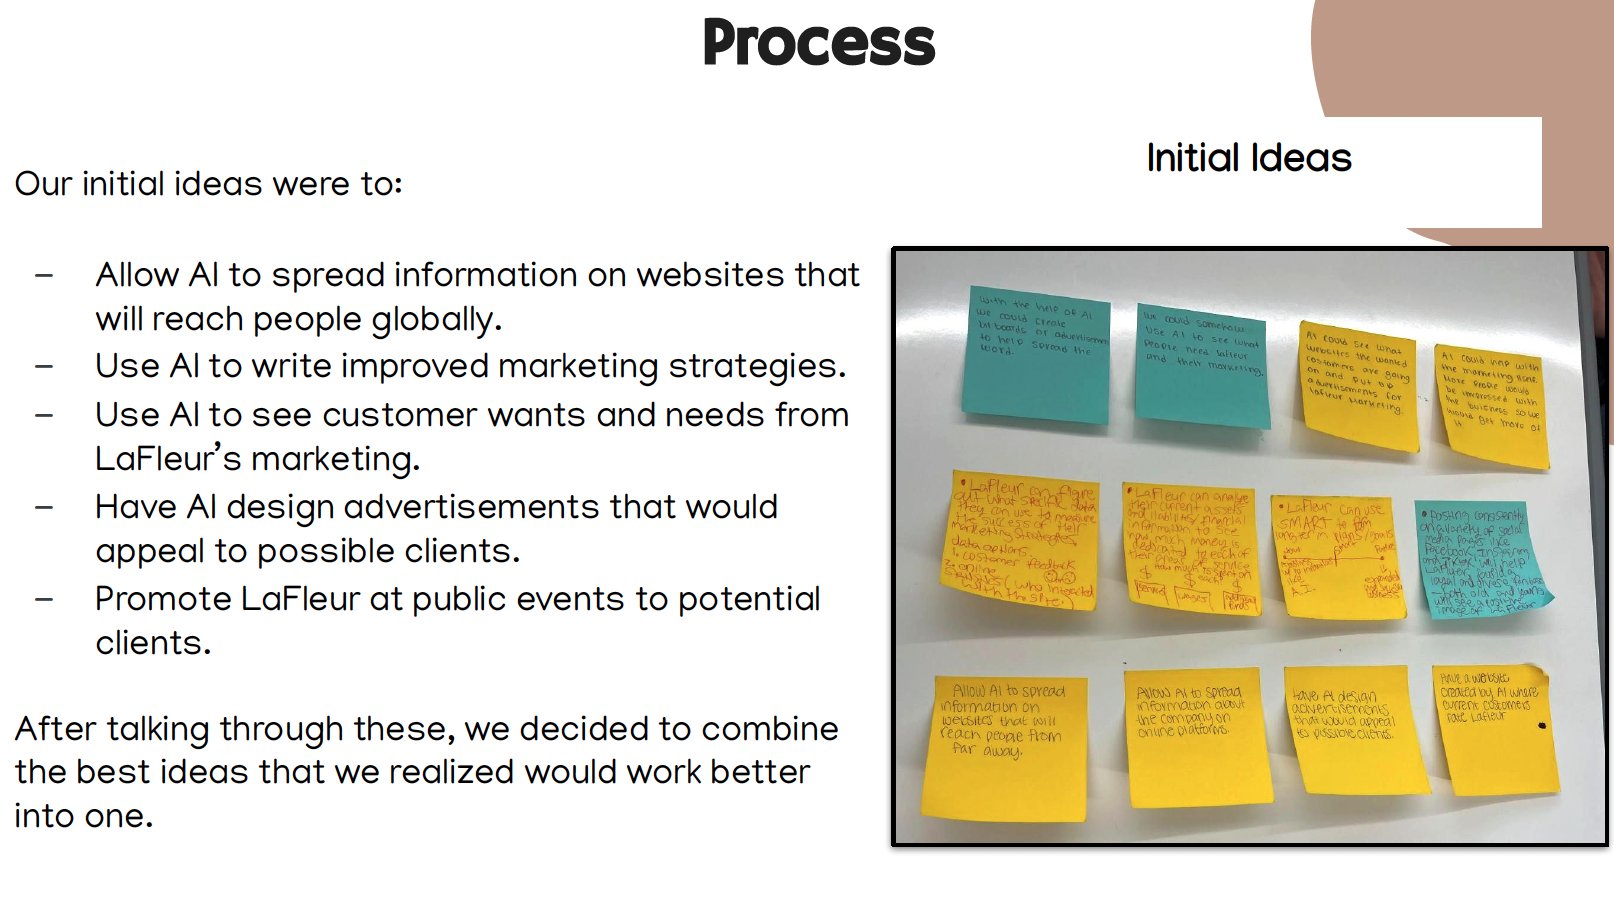 Presentation slide with post-it notes describing initial ideas for AI use.